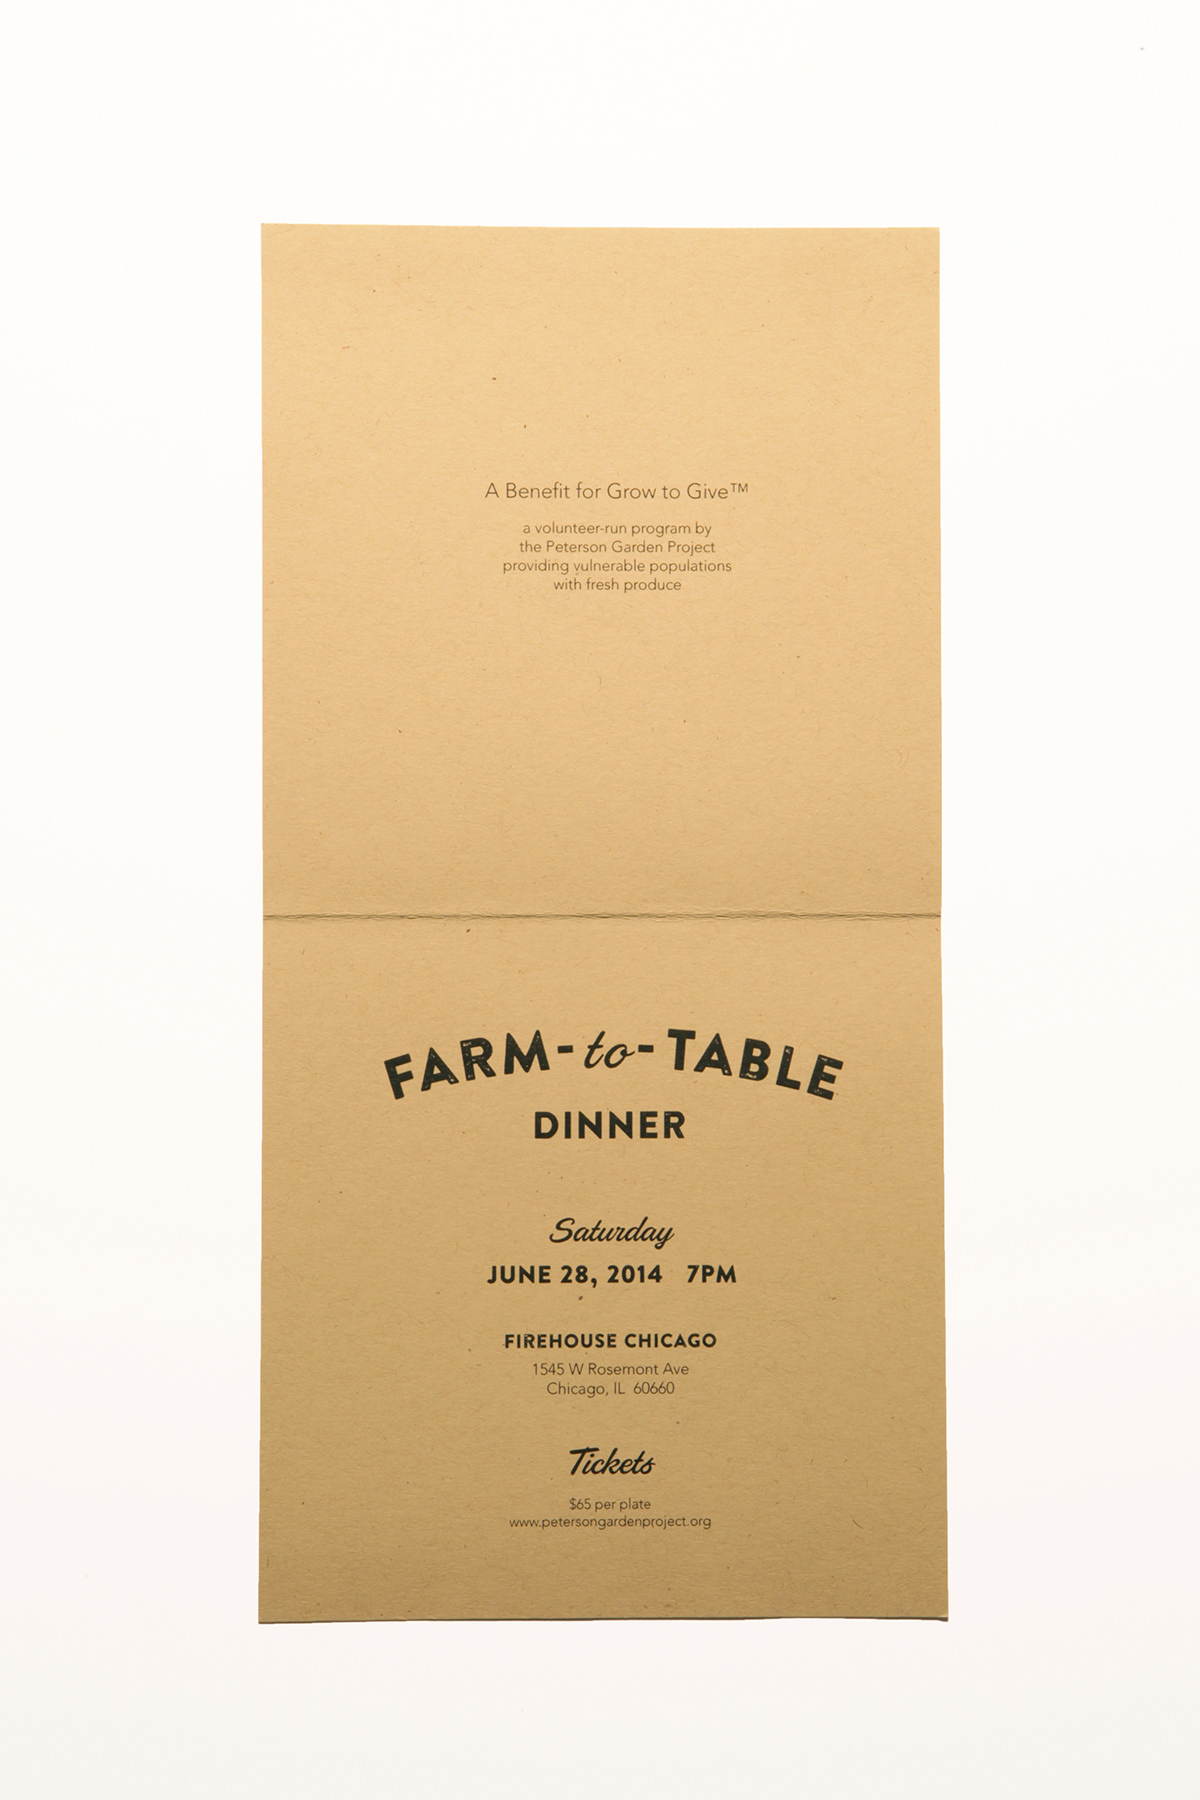 dinner Invitation farm-to-table print save the date